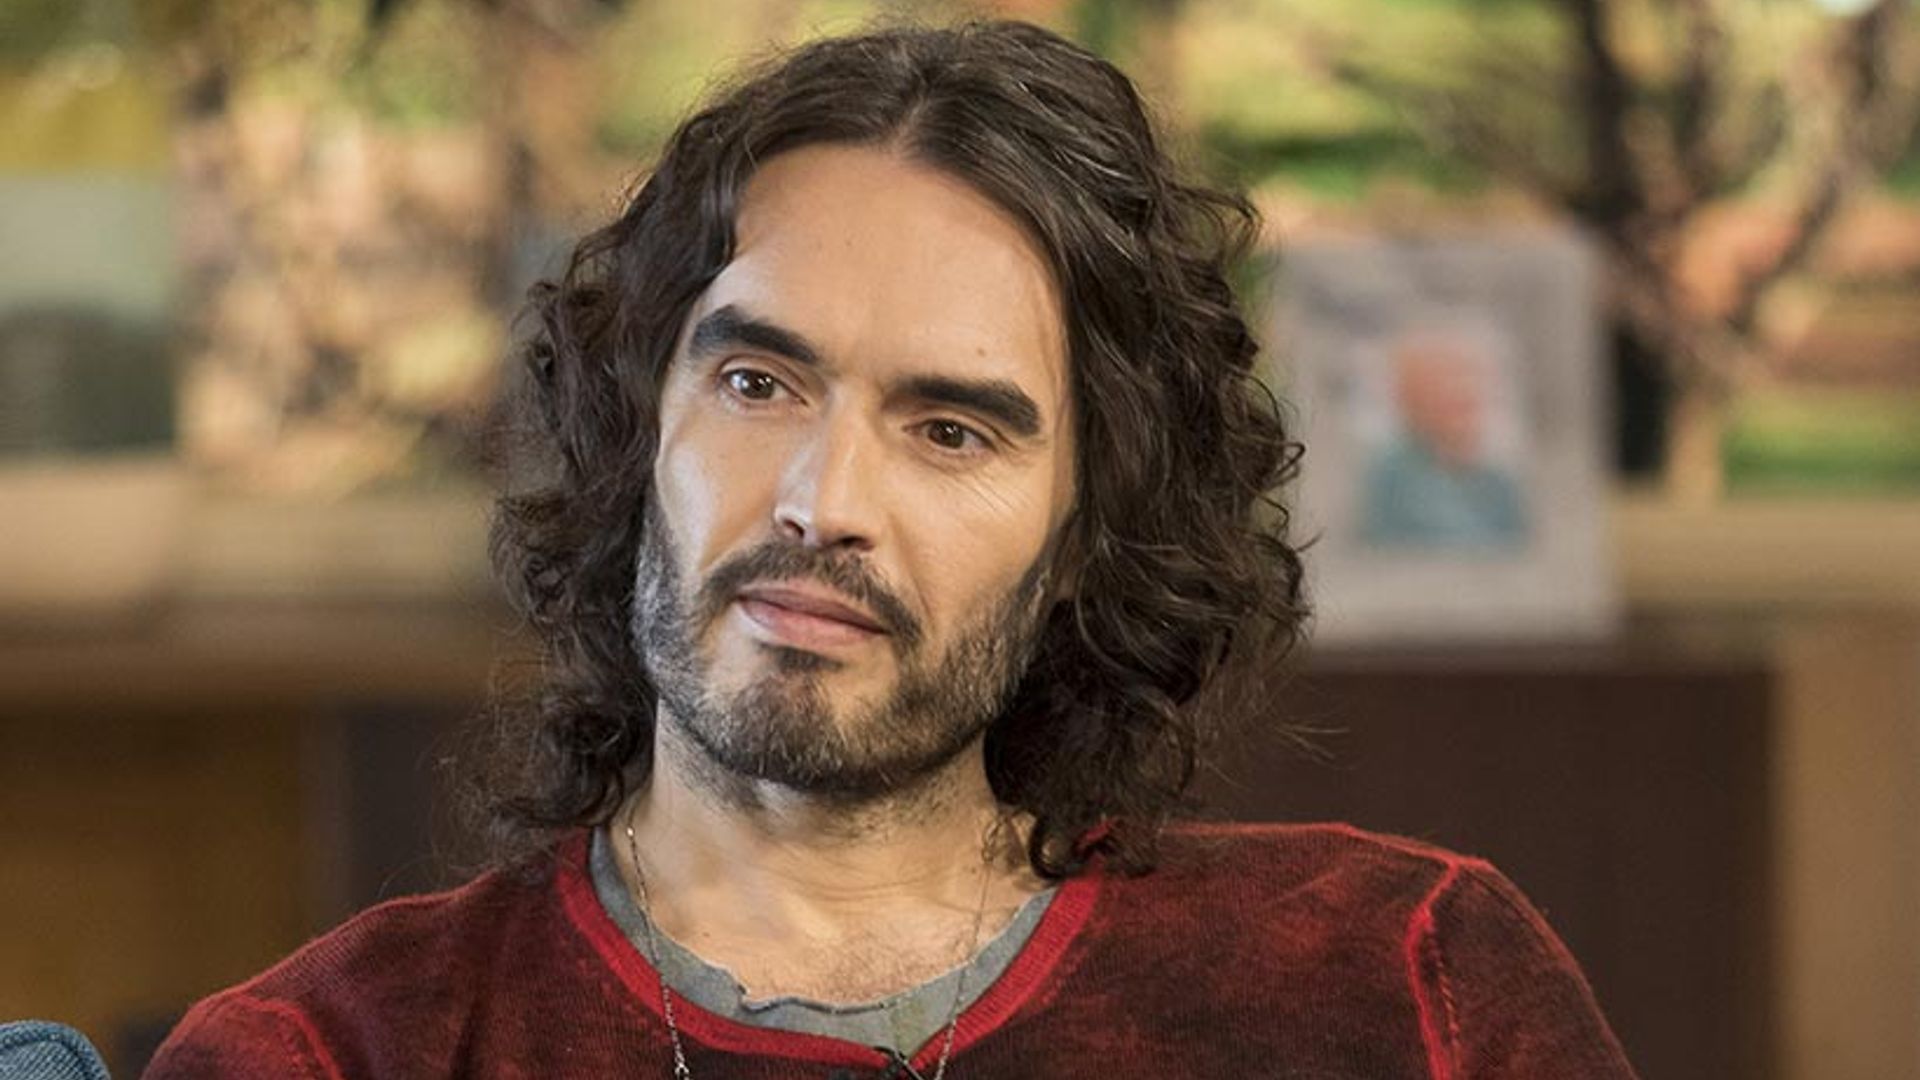 Russell Brand breaks his silence, begs fans for support amid shocking allegations